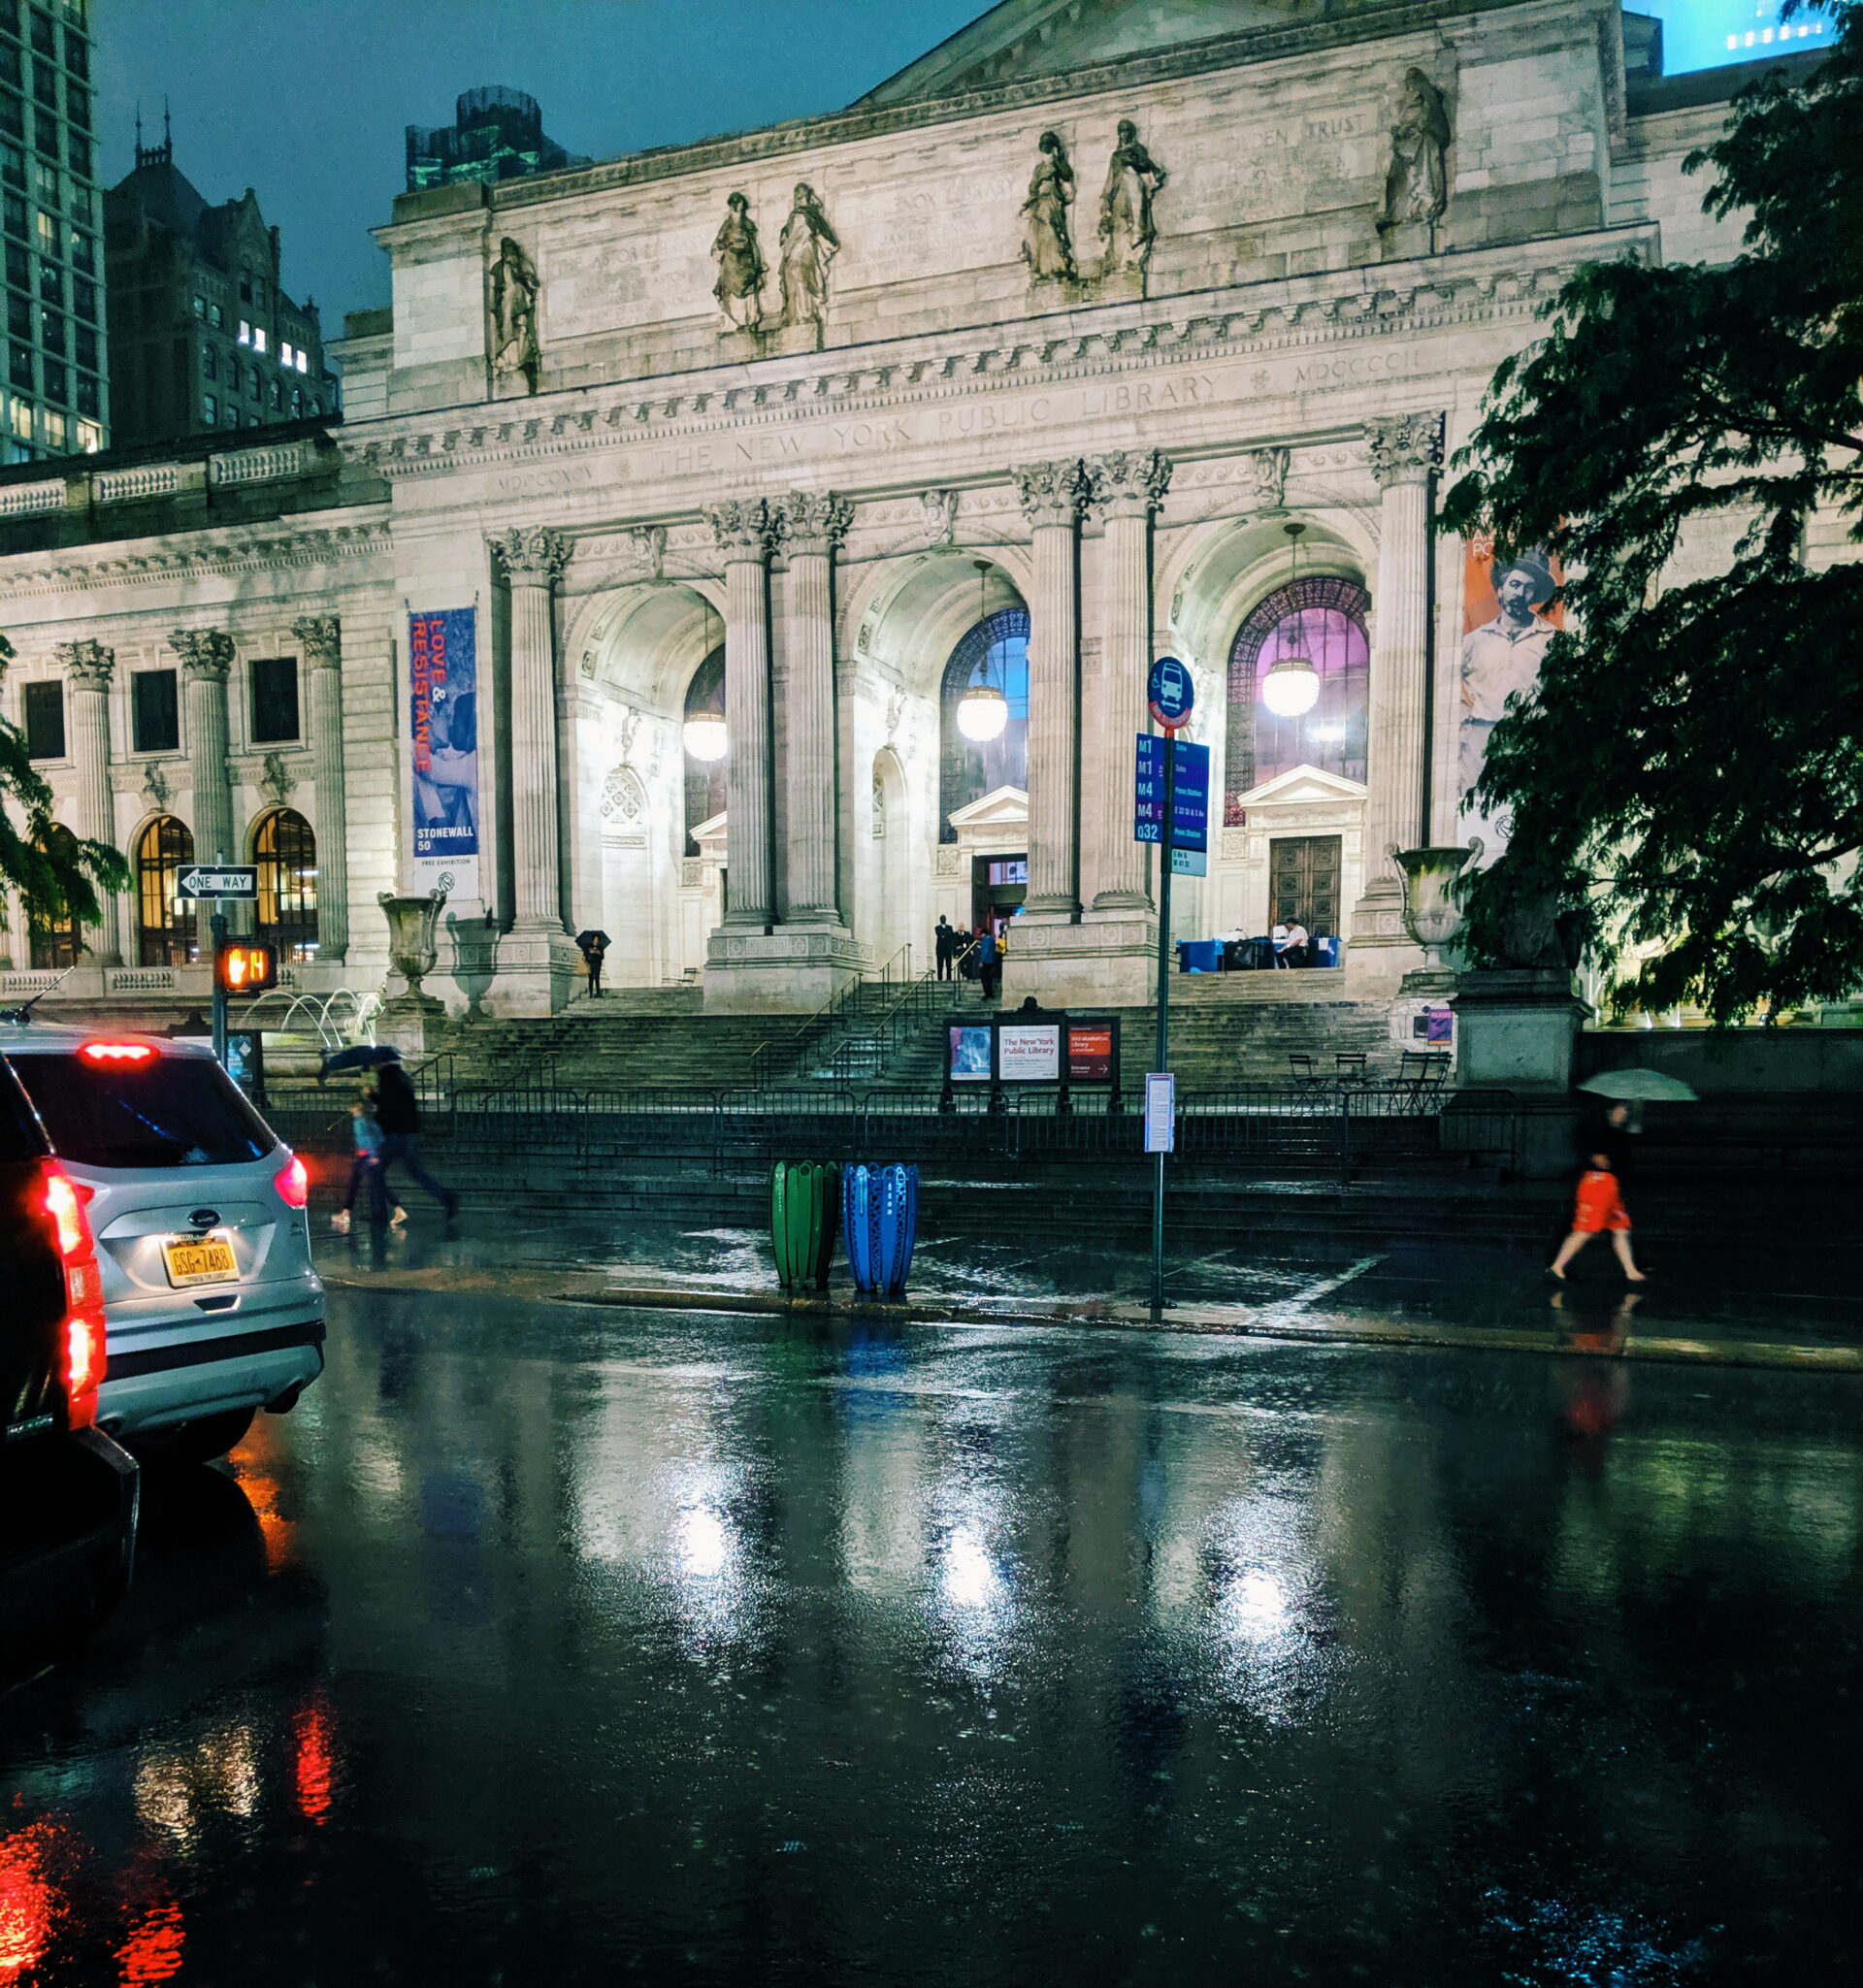 building of the main branch of the public library on fifth avenue in the rain